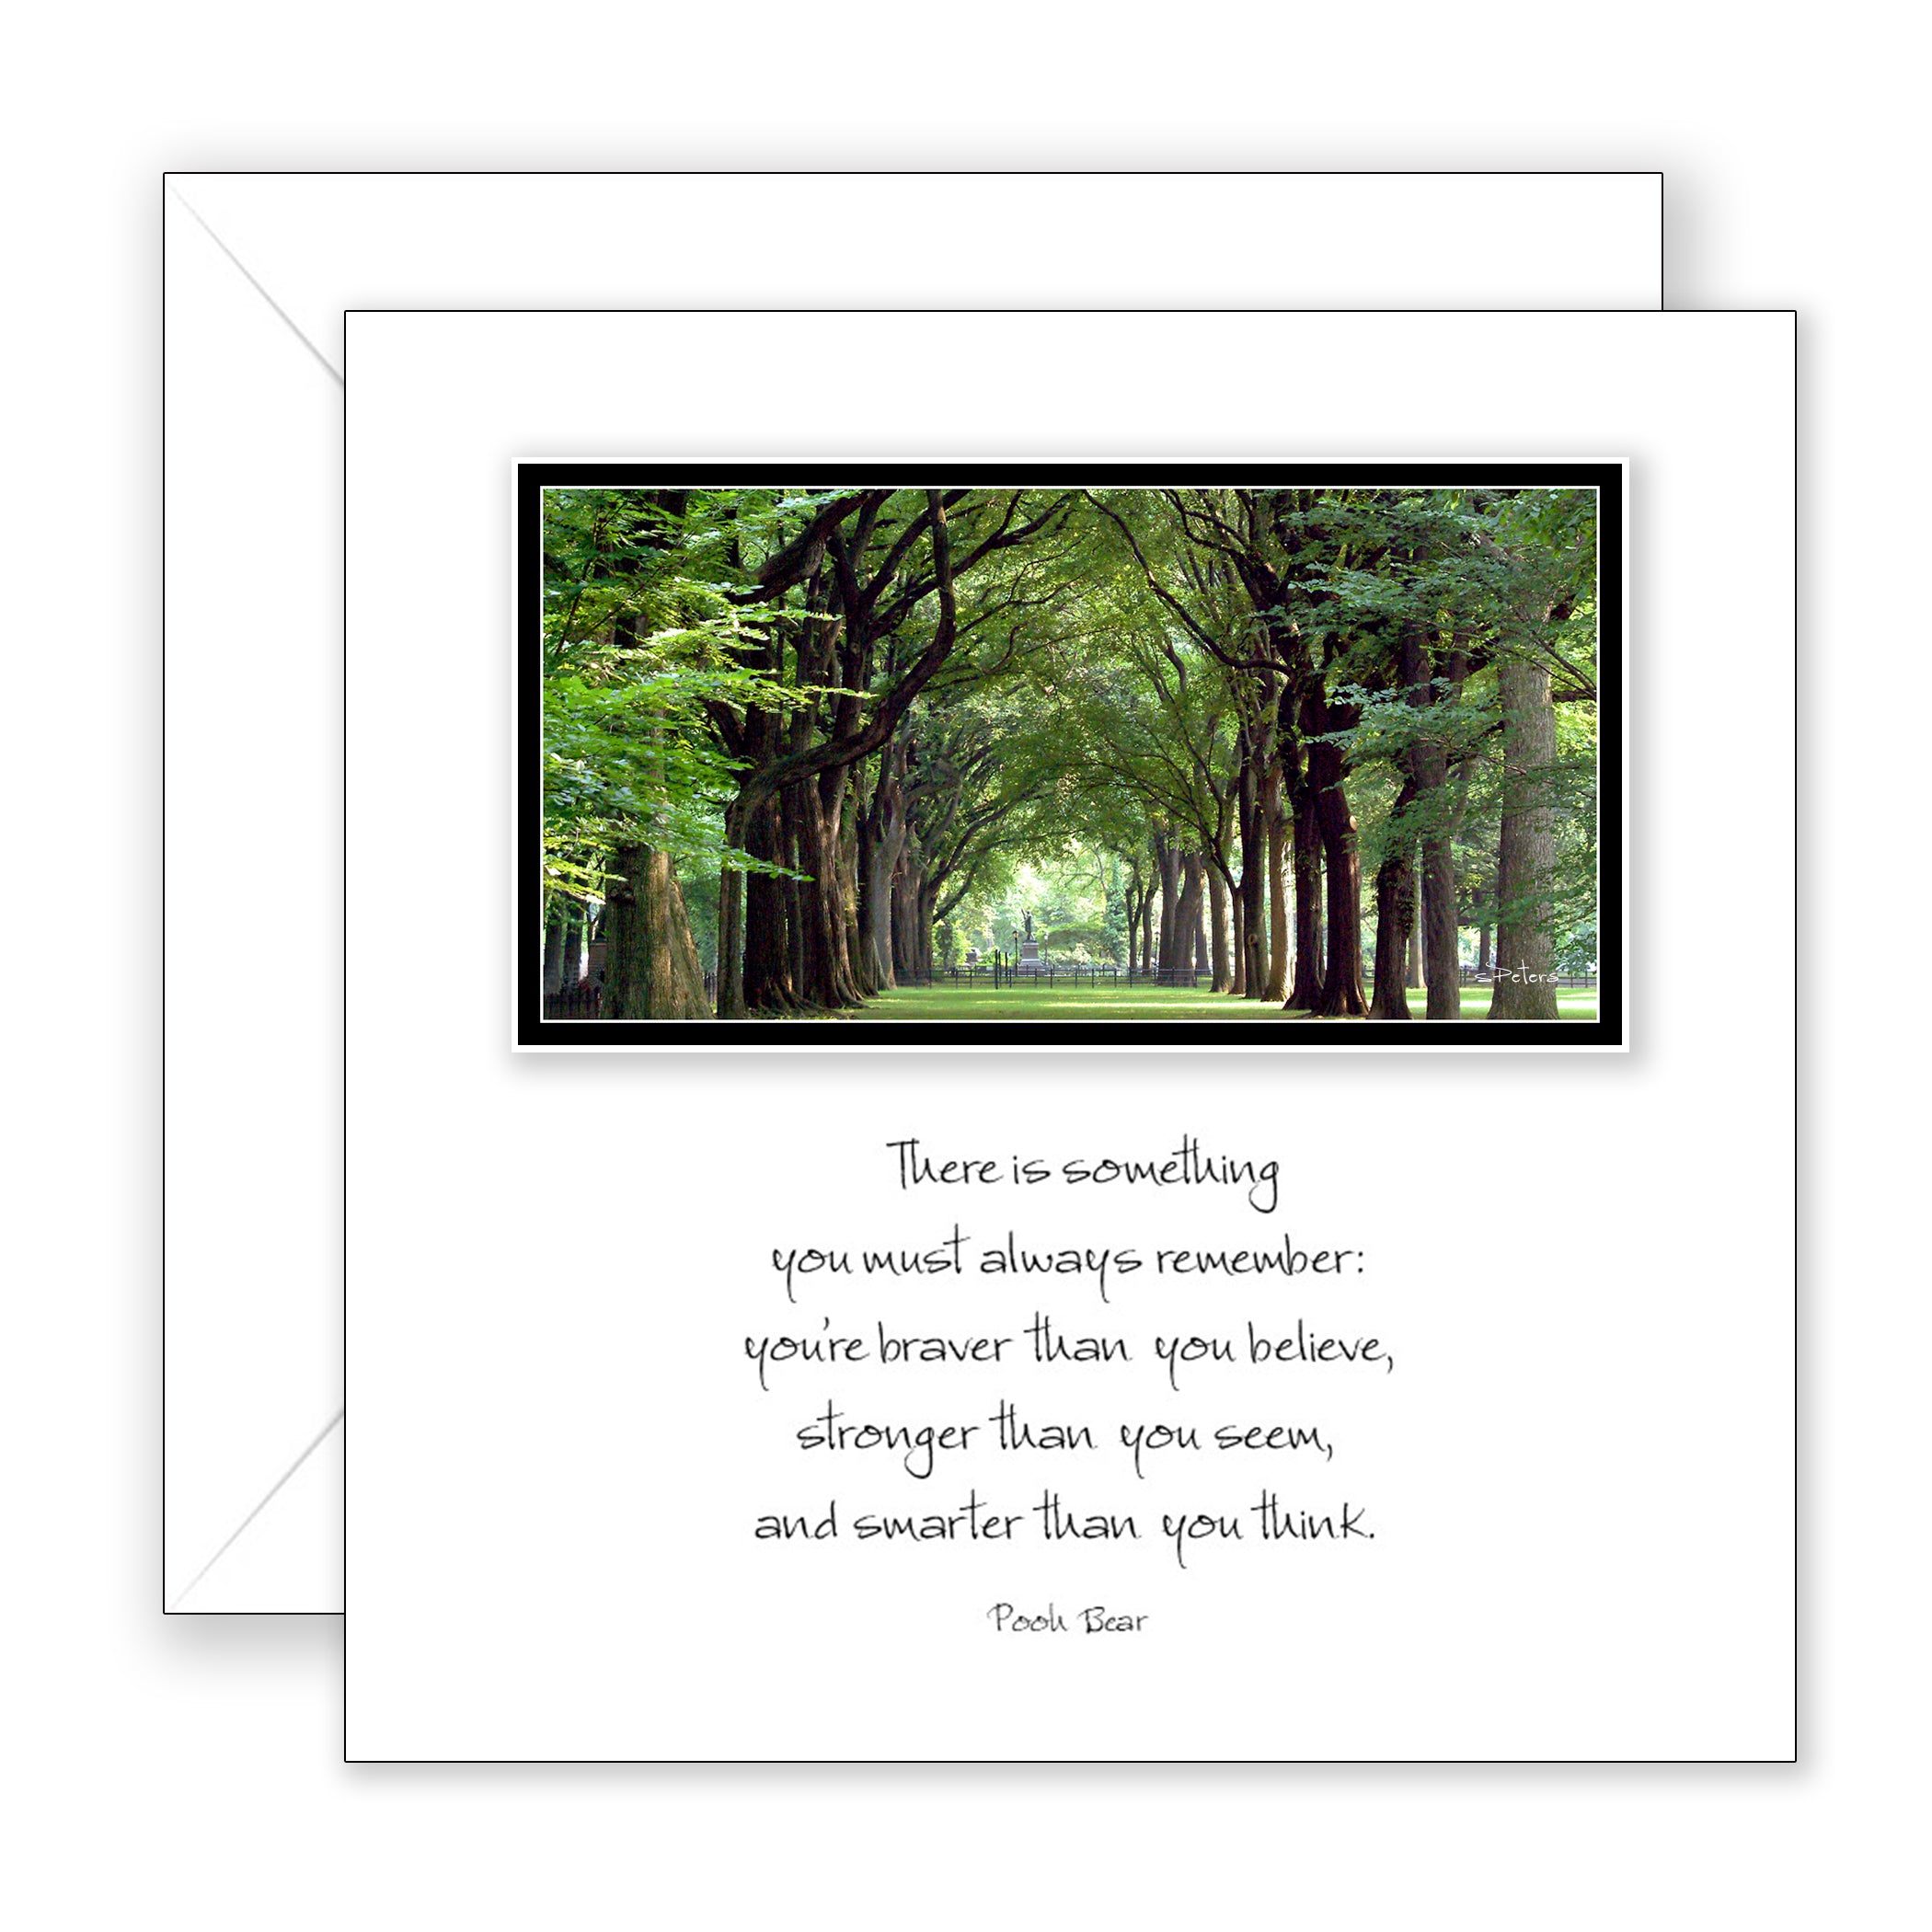 Central Park and Pooh - Thinking of You Card (Blank)